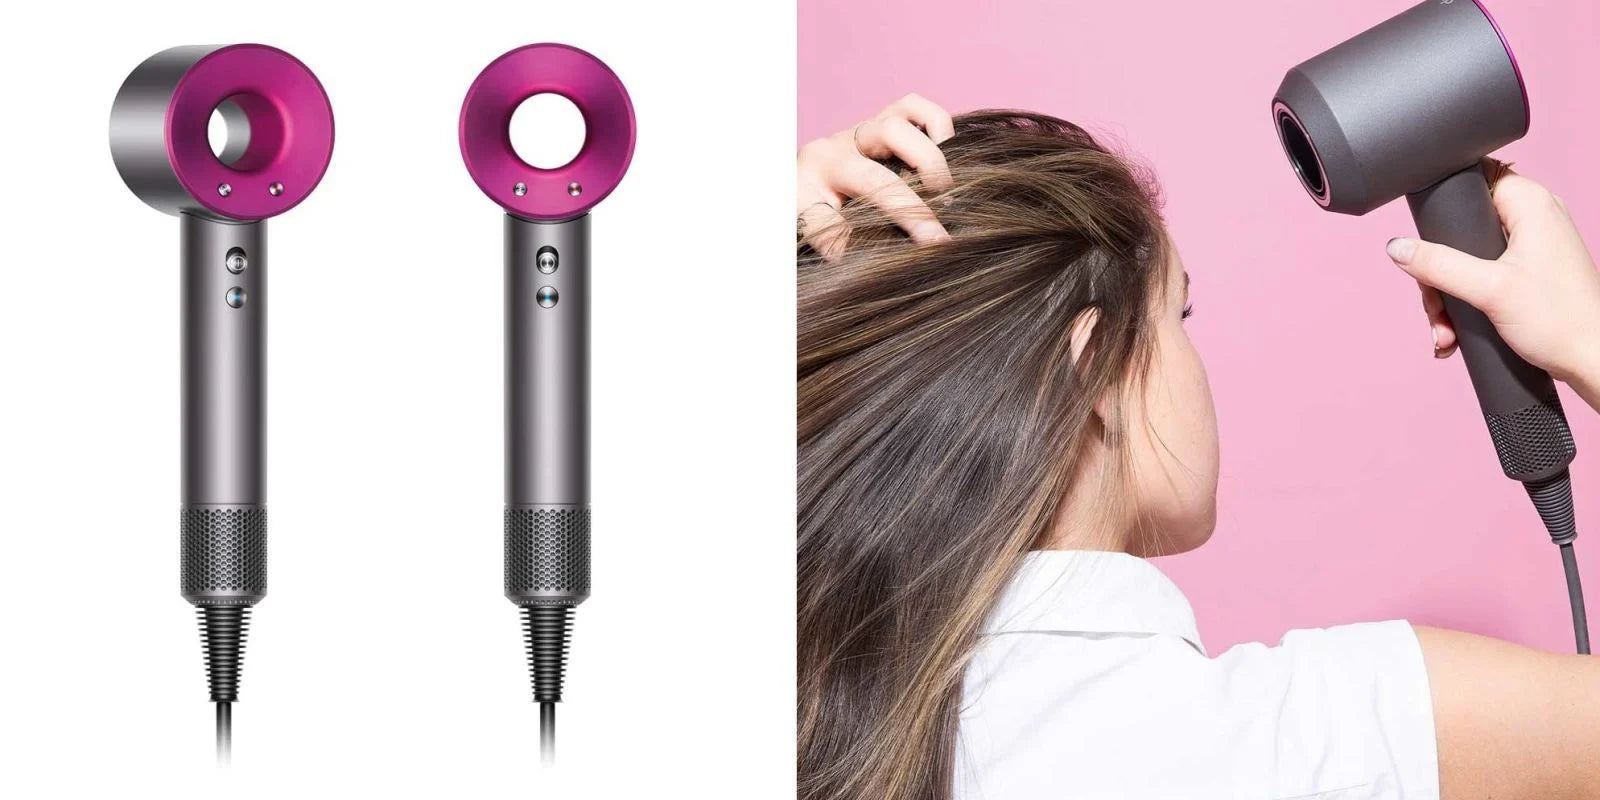 Dyson Supersonic Hairdryer review for hairstylists – noellesalon